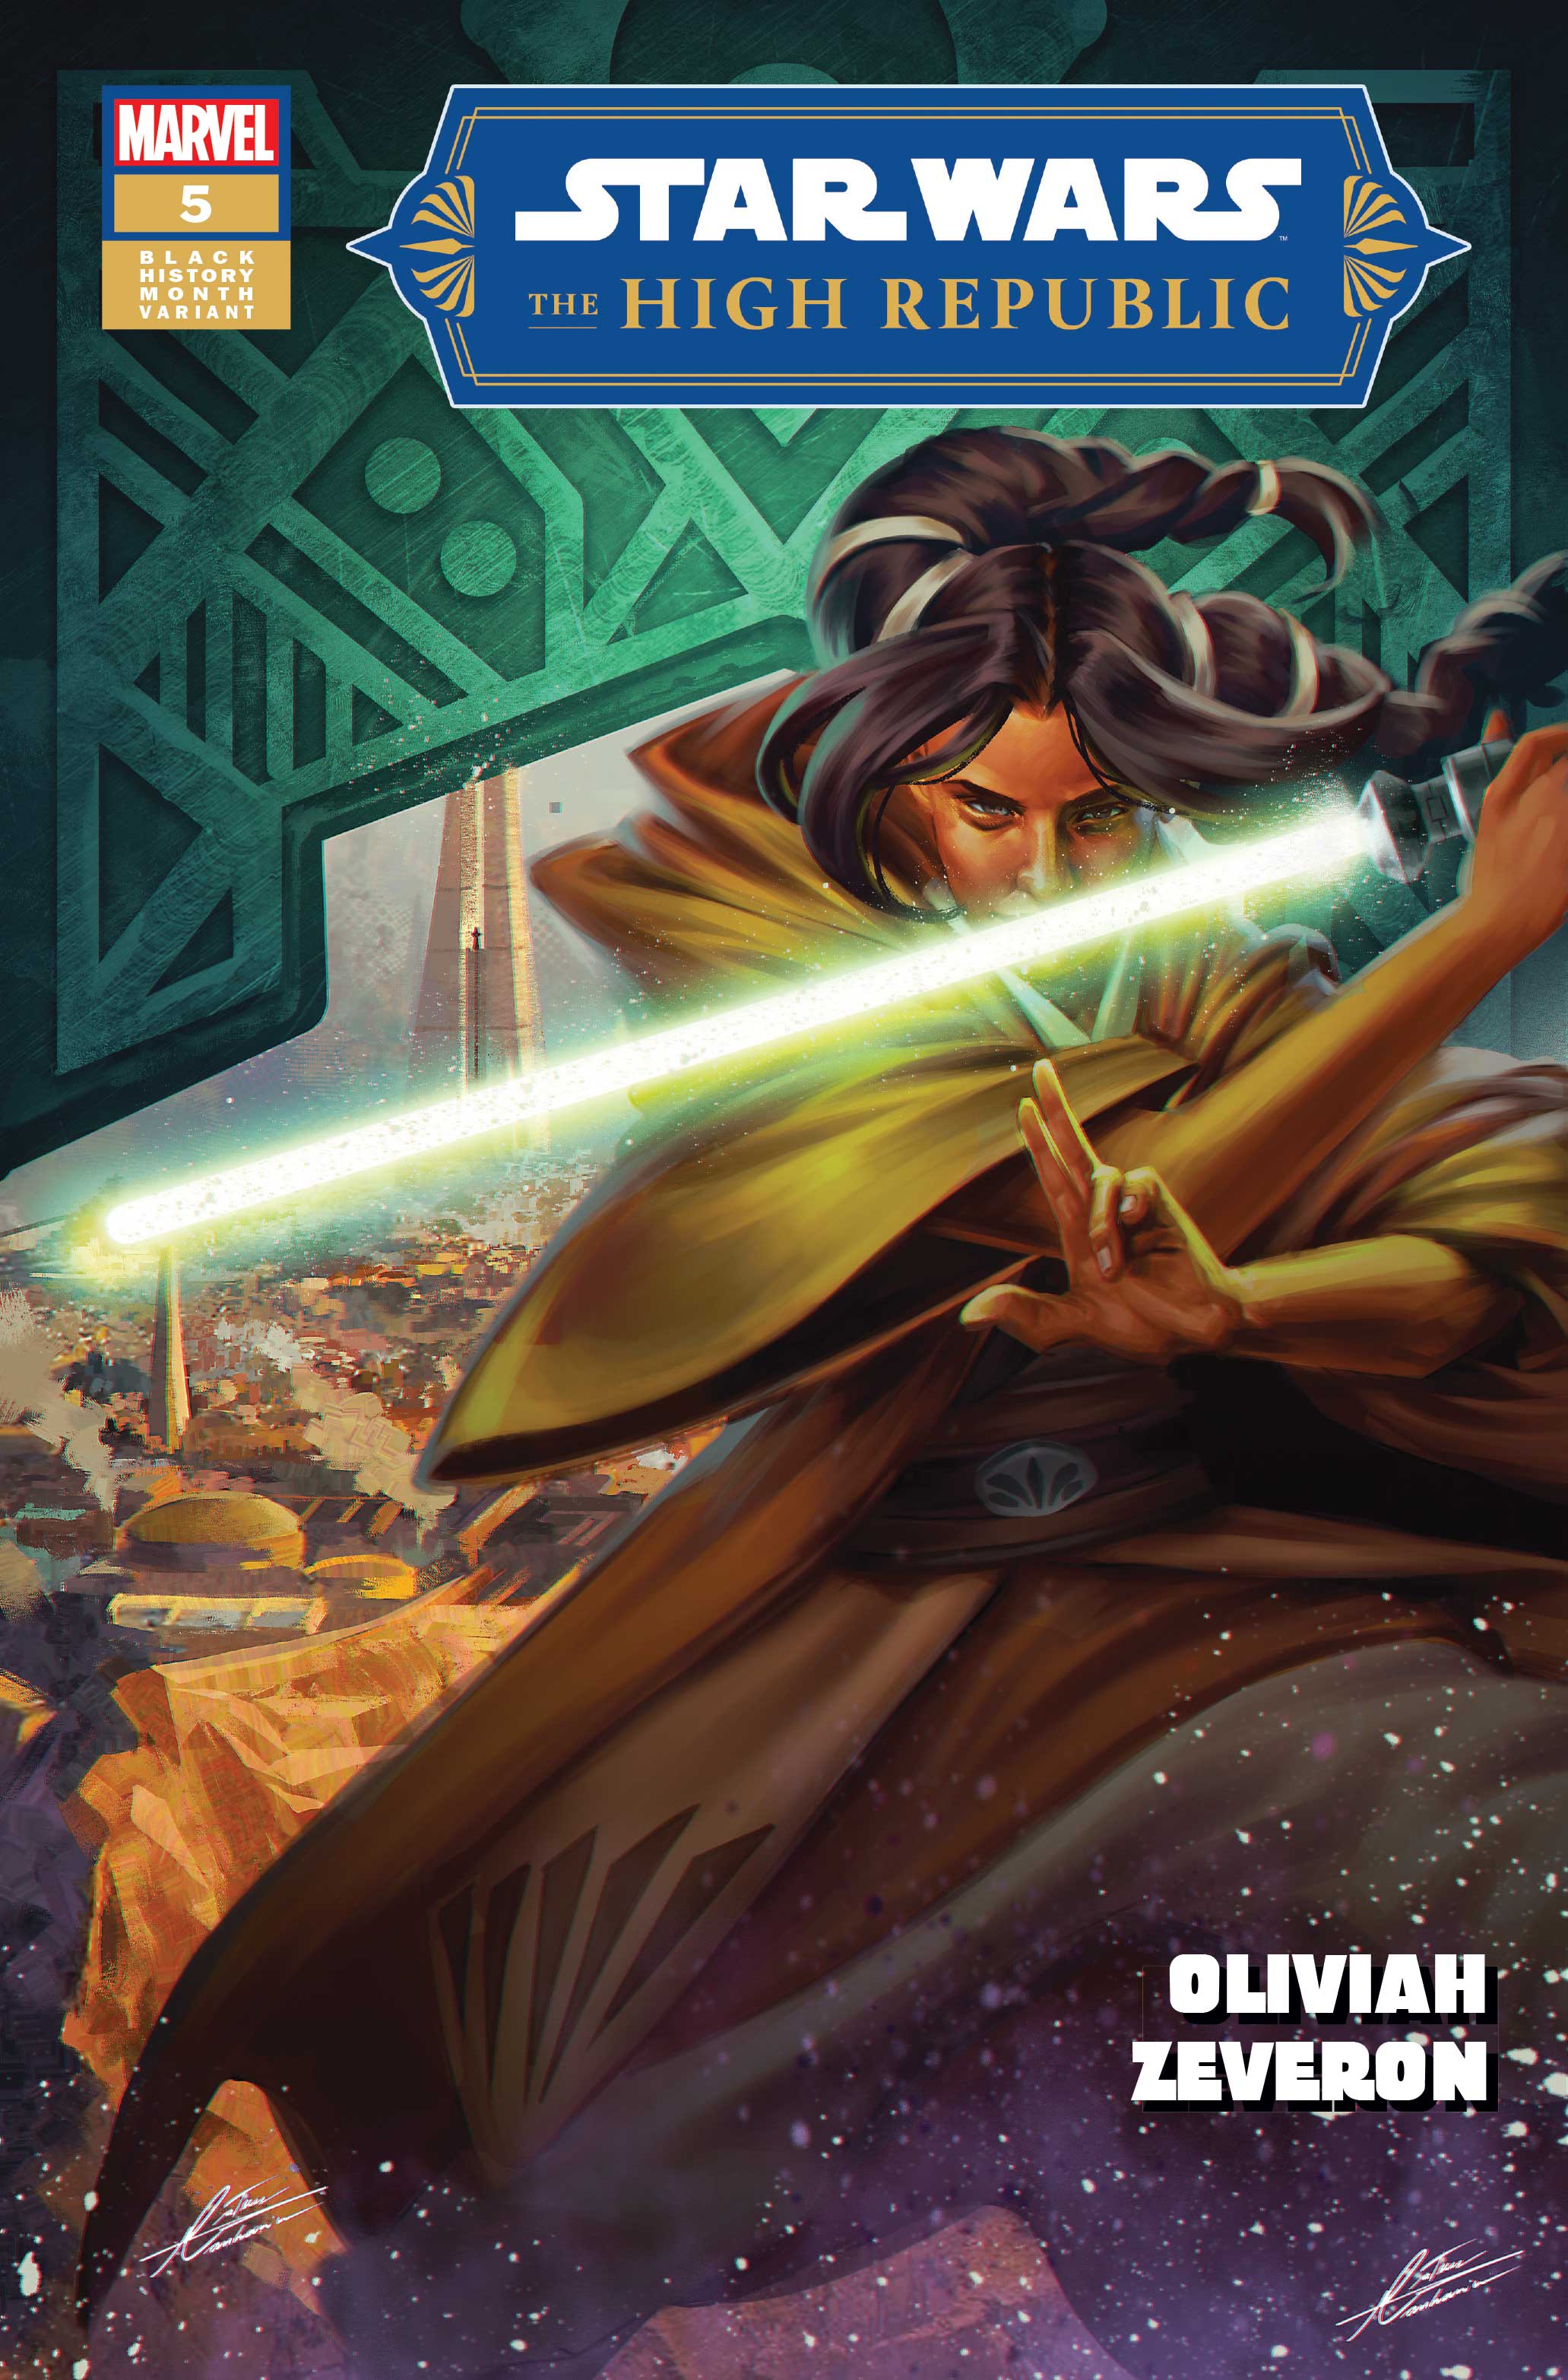 Cover featuring Oliviah Zeveron in Jedi robes holding a green lightsaber